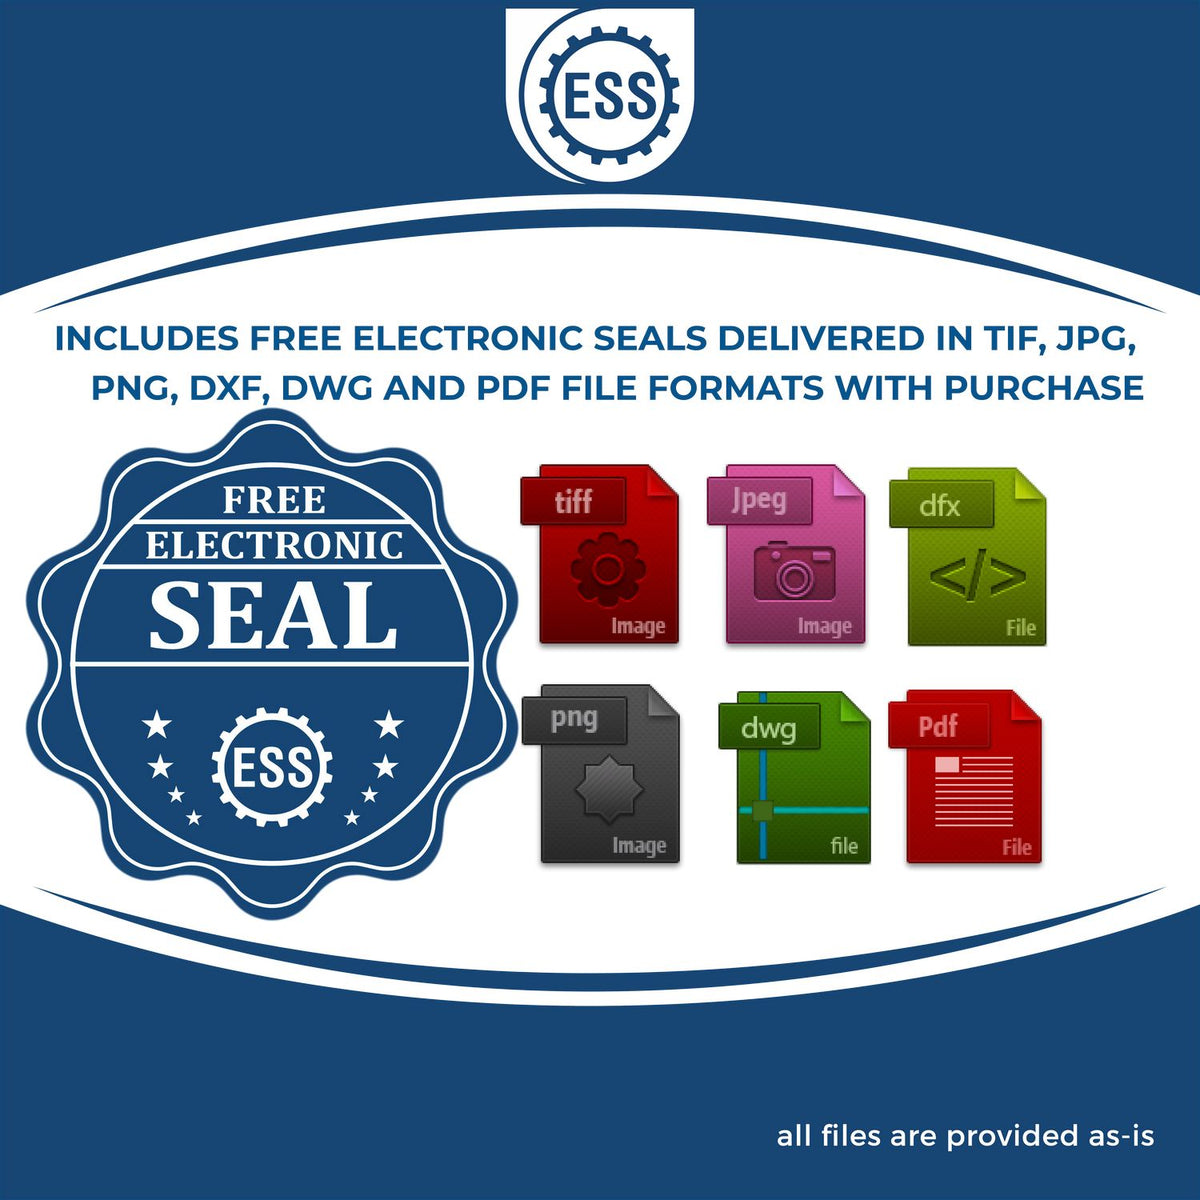 An infographic for the free electronic seal for the Slim Pre-Inked Tennessee Land Surveyor Seal Stamp illustrating the different file type icons such as DXF, DWG, TIF, JPG and PNG.